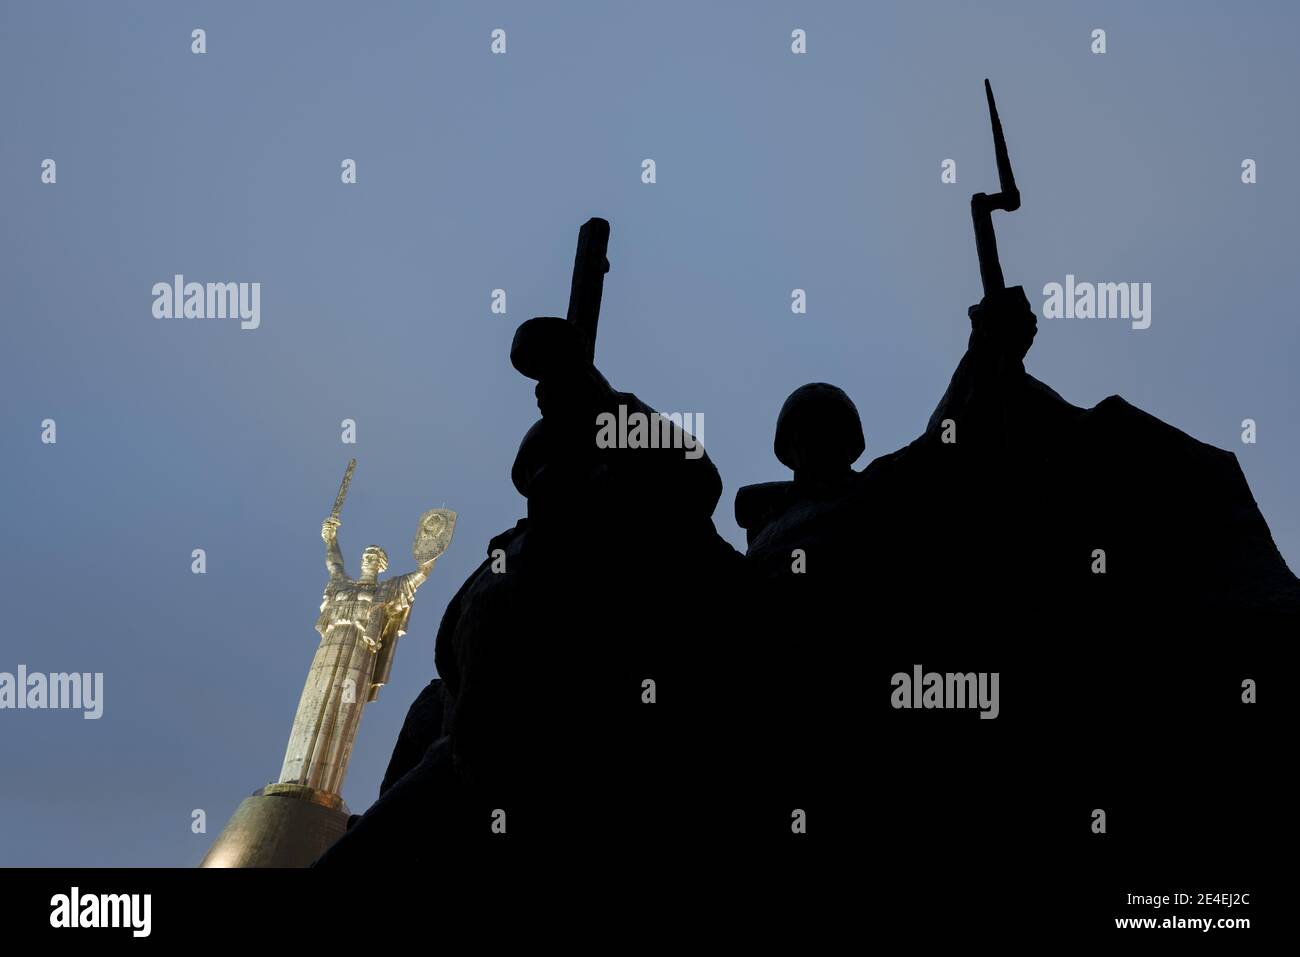 Silhouette of the Motherland Monument in Ukrainian State Museum of the Great Patriotic War in Kyiv, Ukraine Stock Photo